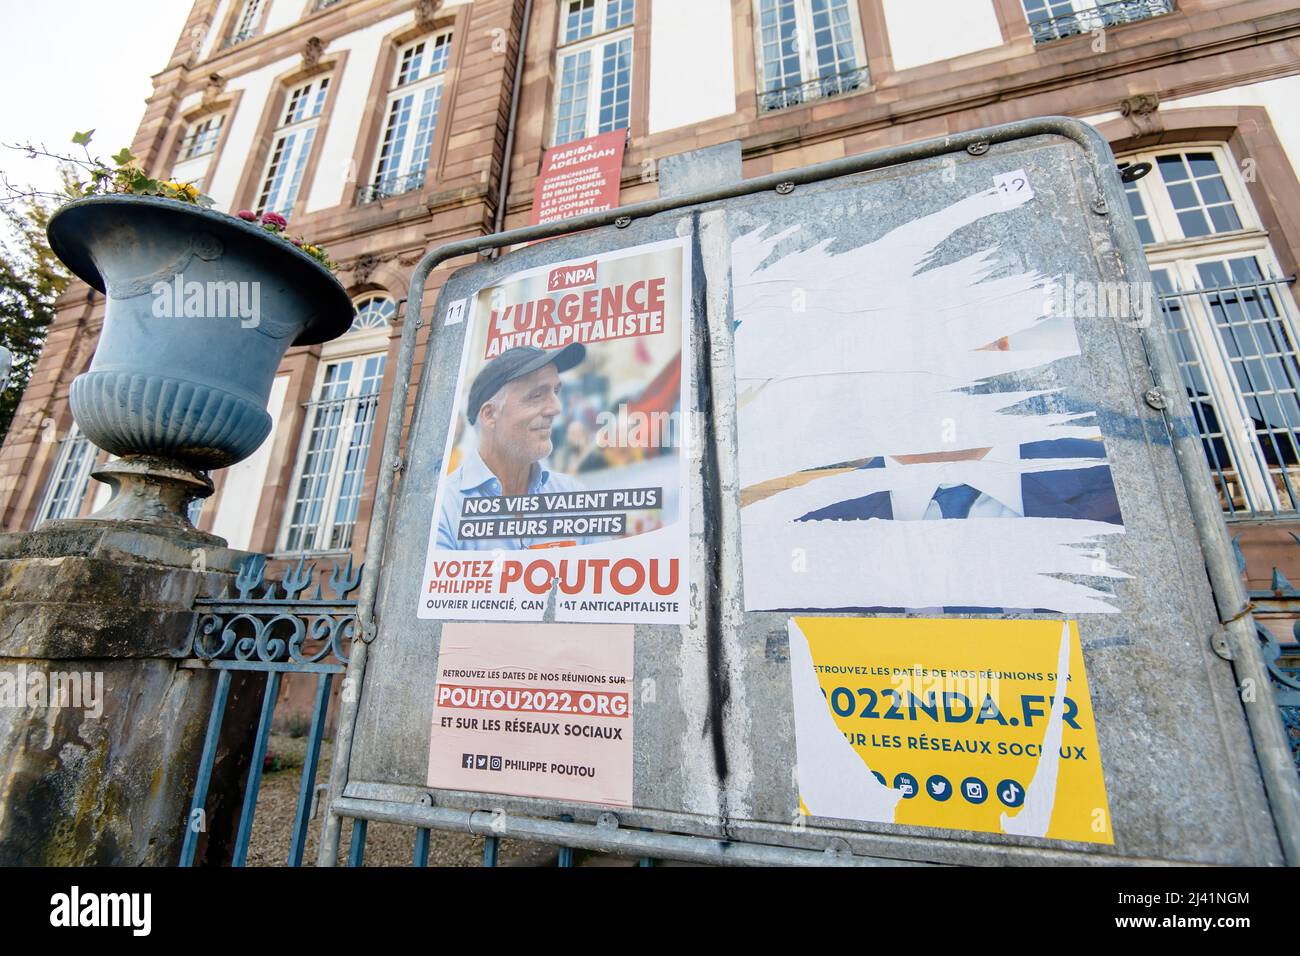 STRASBOURG, FRANCE - APR 23, 2022: French presidential posters for the upcoming presidential election in France, in front of the City Hall building in Strasbourg featuring Philippe Poutou and Nicolas Dupont-Aignan Stock Photo